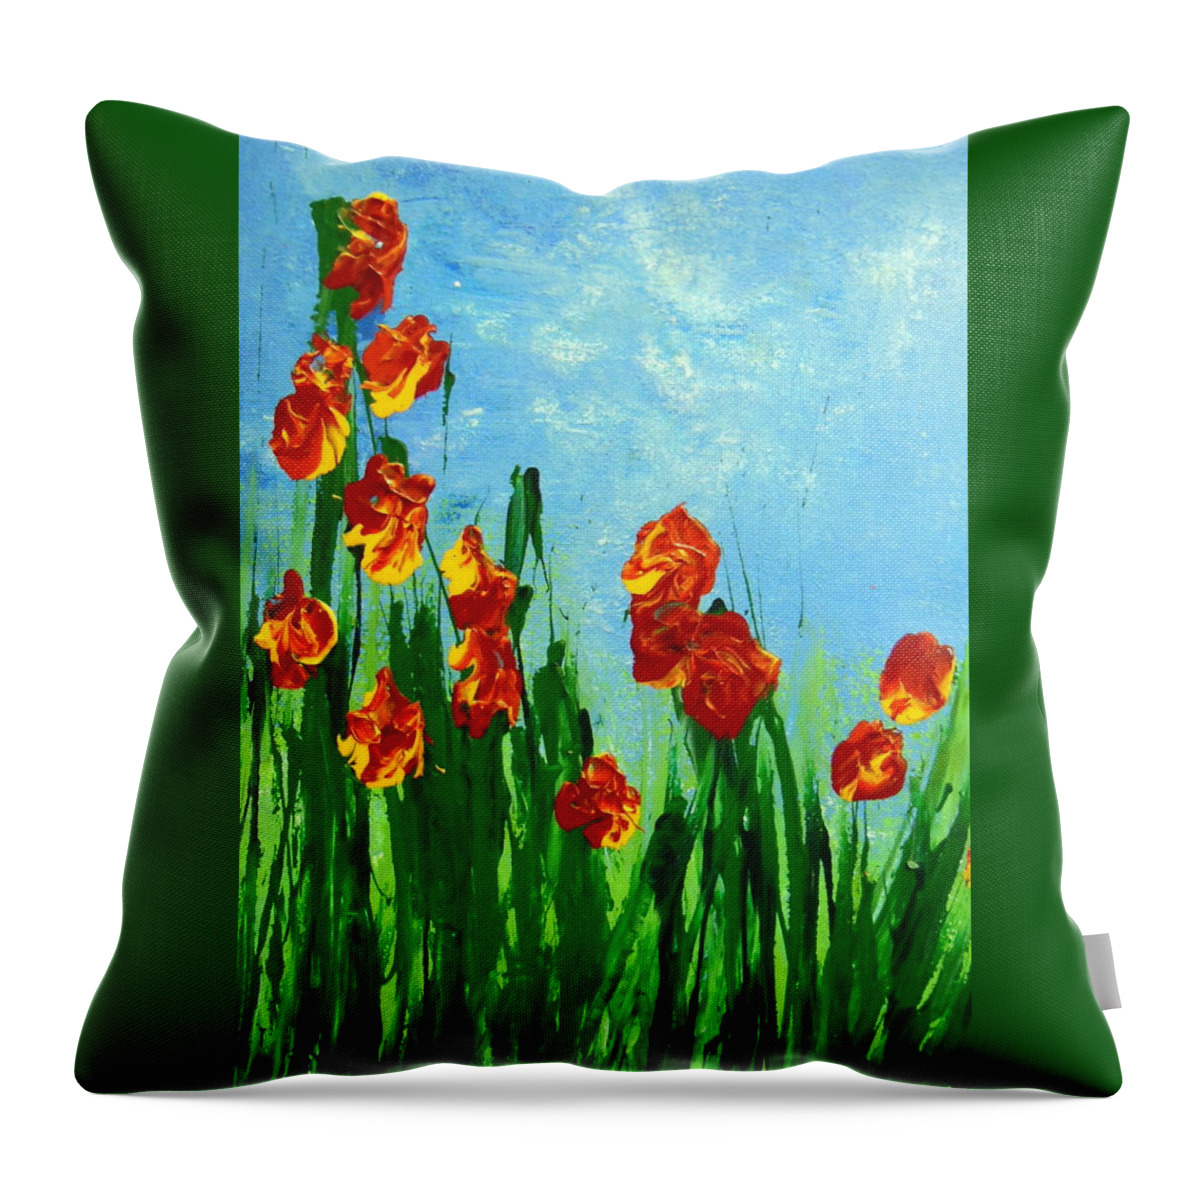 Vibrant Colorful Flowers Throw Pillow featuring the painting Deep Breaths by Aimee Bruno